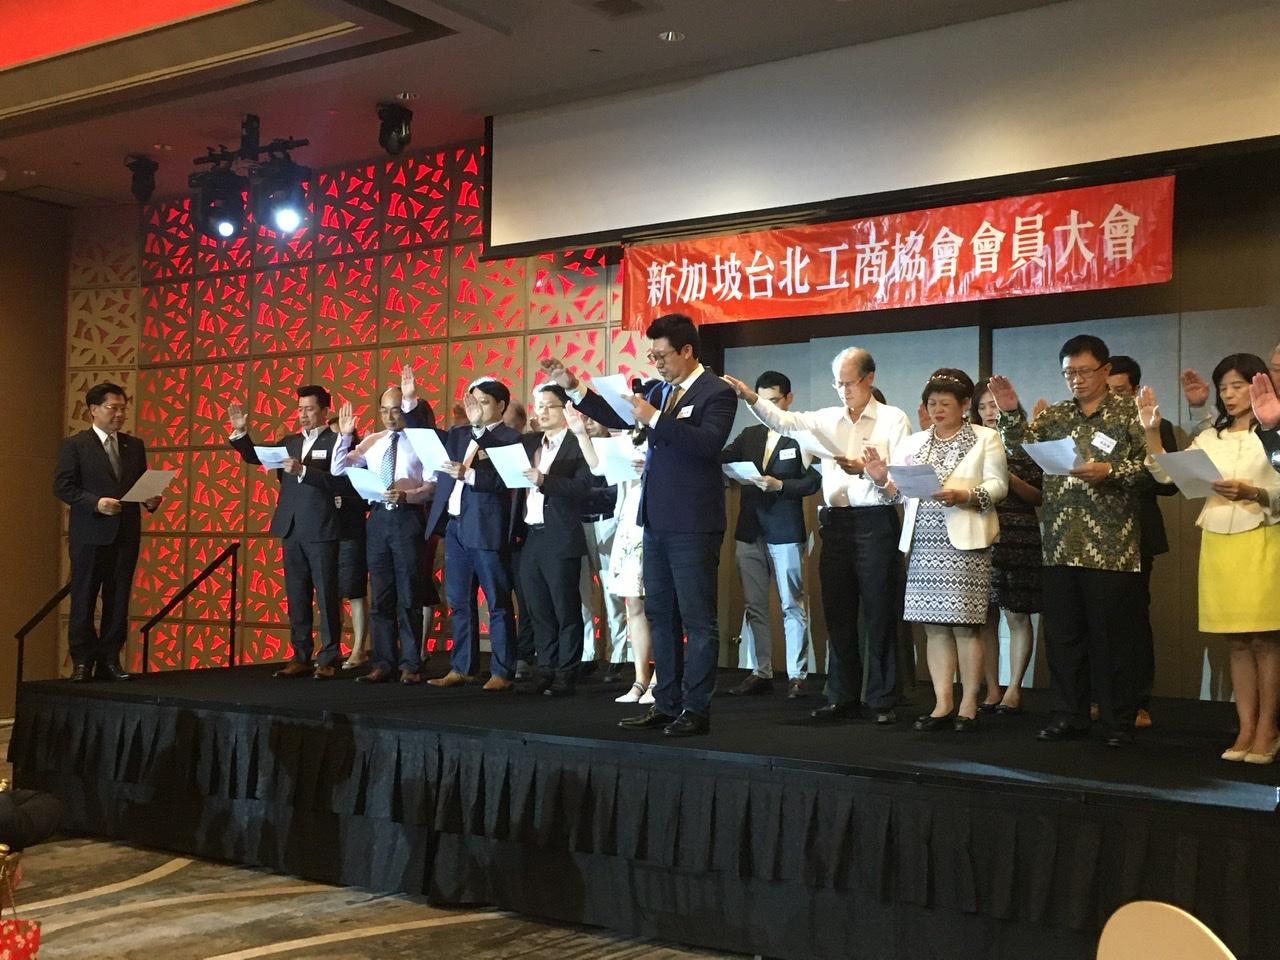 Representative Francis Liang (extreme left) presiding over the swearing-in of Mr. James Yang (front row, holding microphone), newly elected President and his executive committee members at the 2020 Inauguration Ceremony of the Taipei Business Association in Singapore. (2020/01/18)